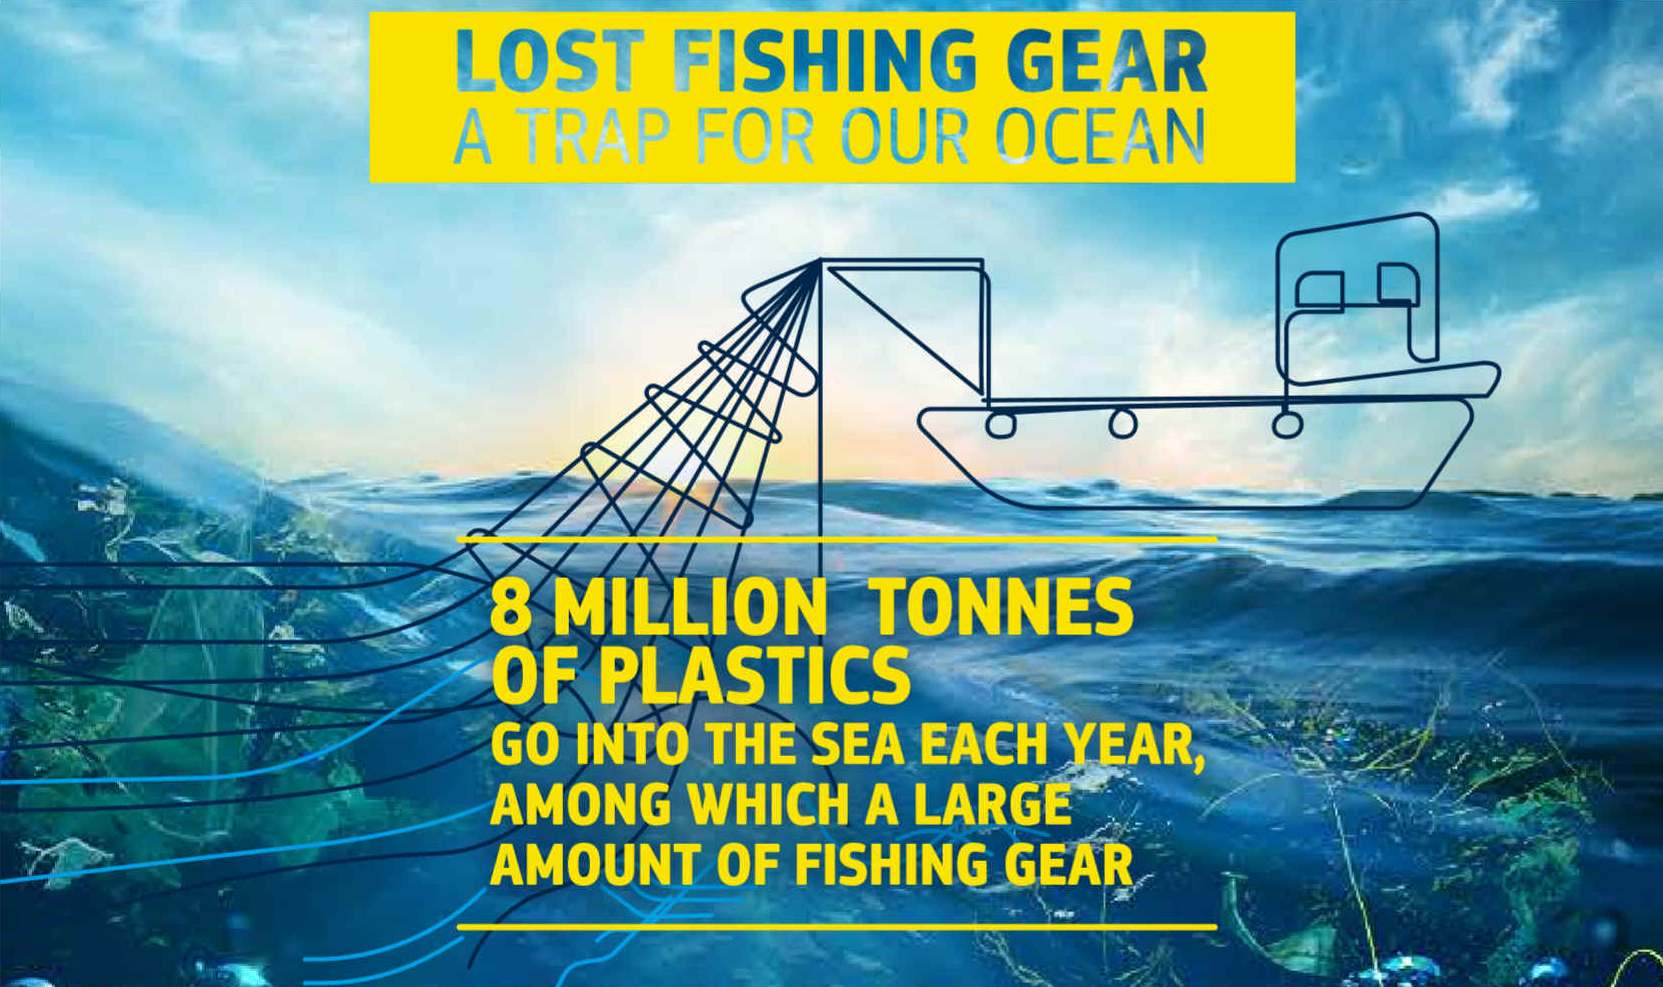 8 million tons of plastic goes into the sea every year